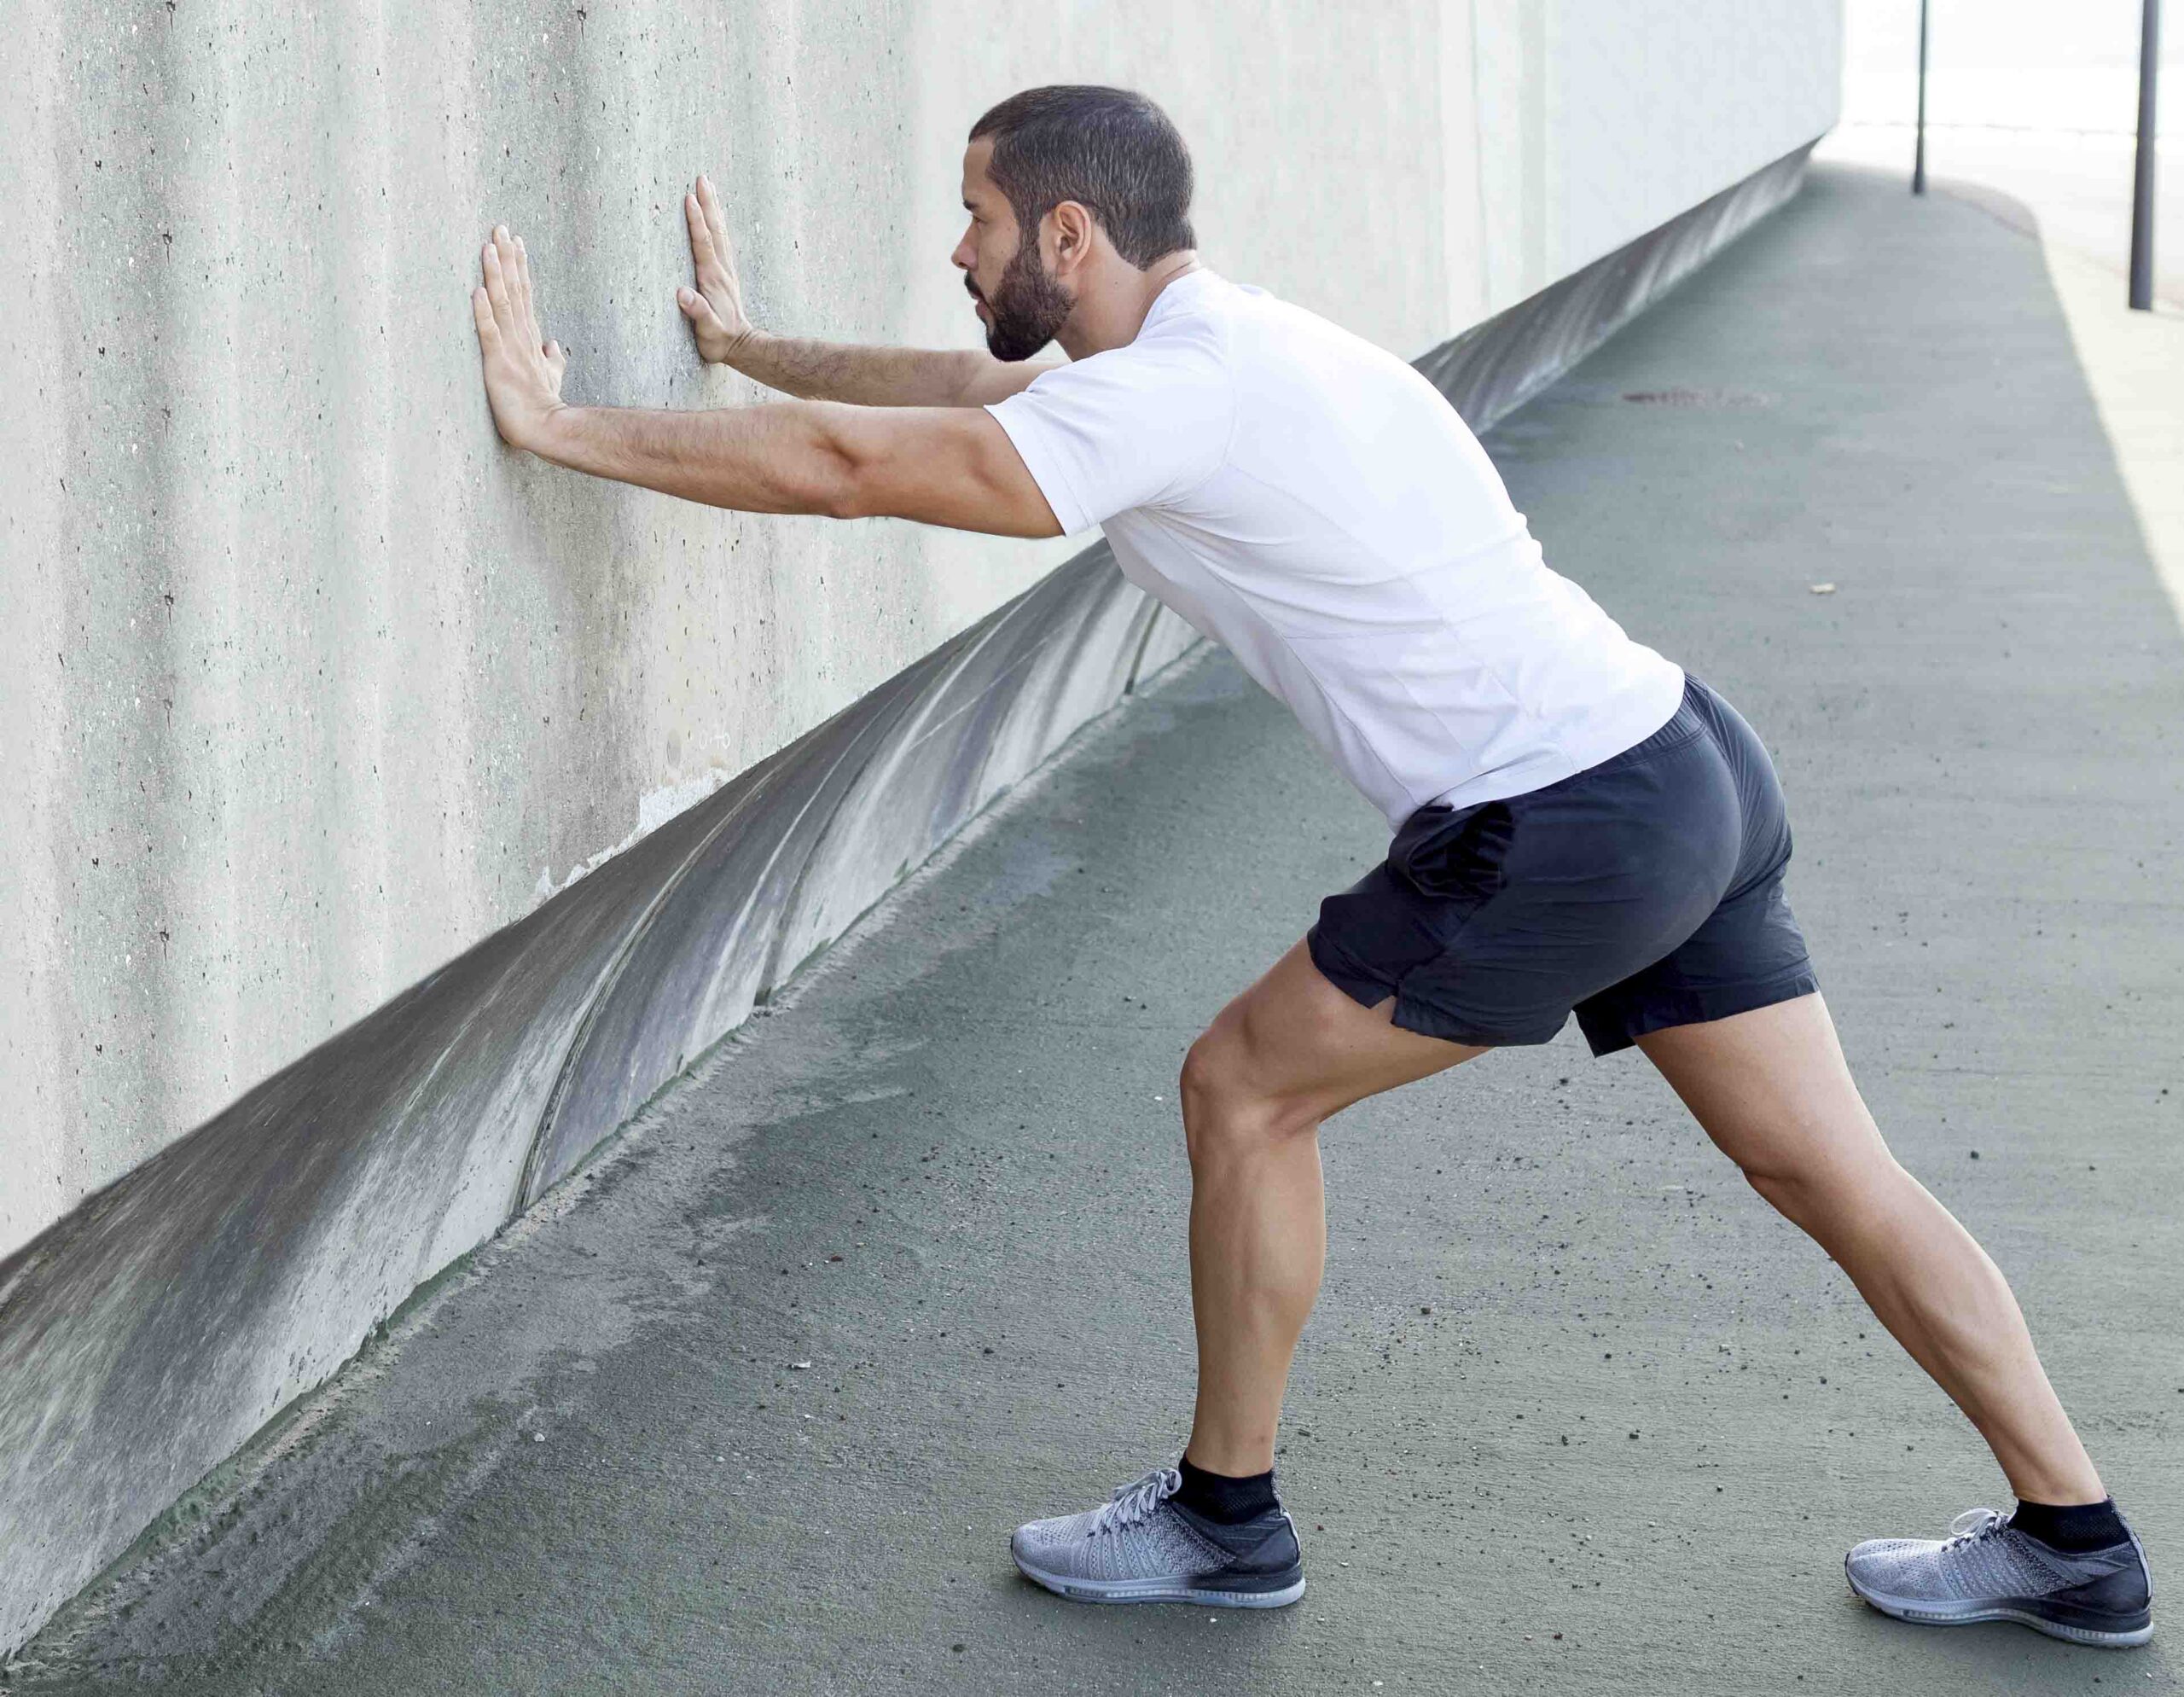 How to Get Rid of Sore Calves From Running